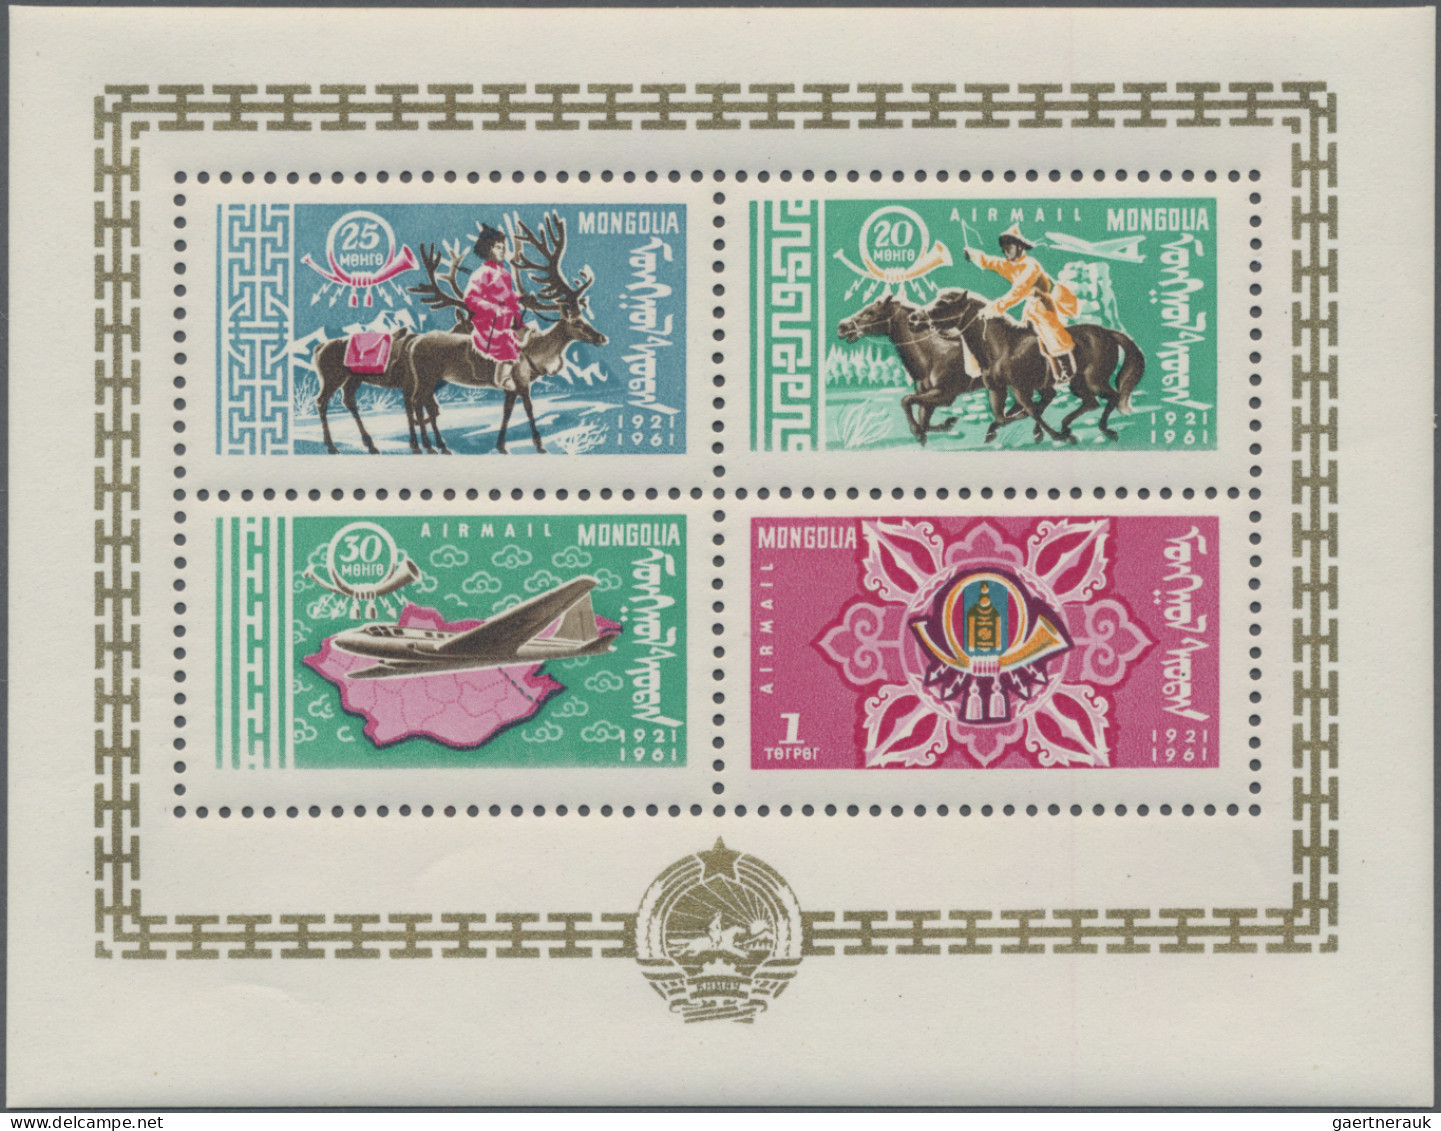 Mongolia: 1961 'Postal & Transport Services': The First Two Souvenir Sheets Of M - Mongolia